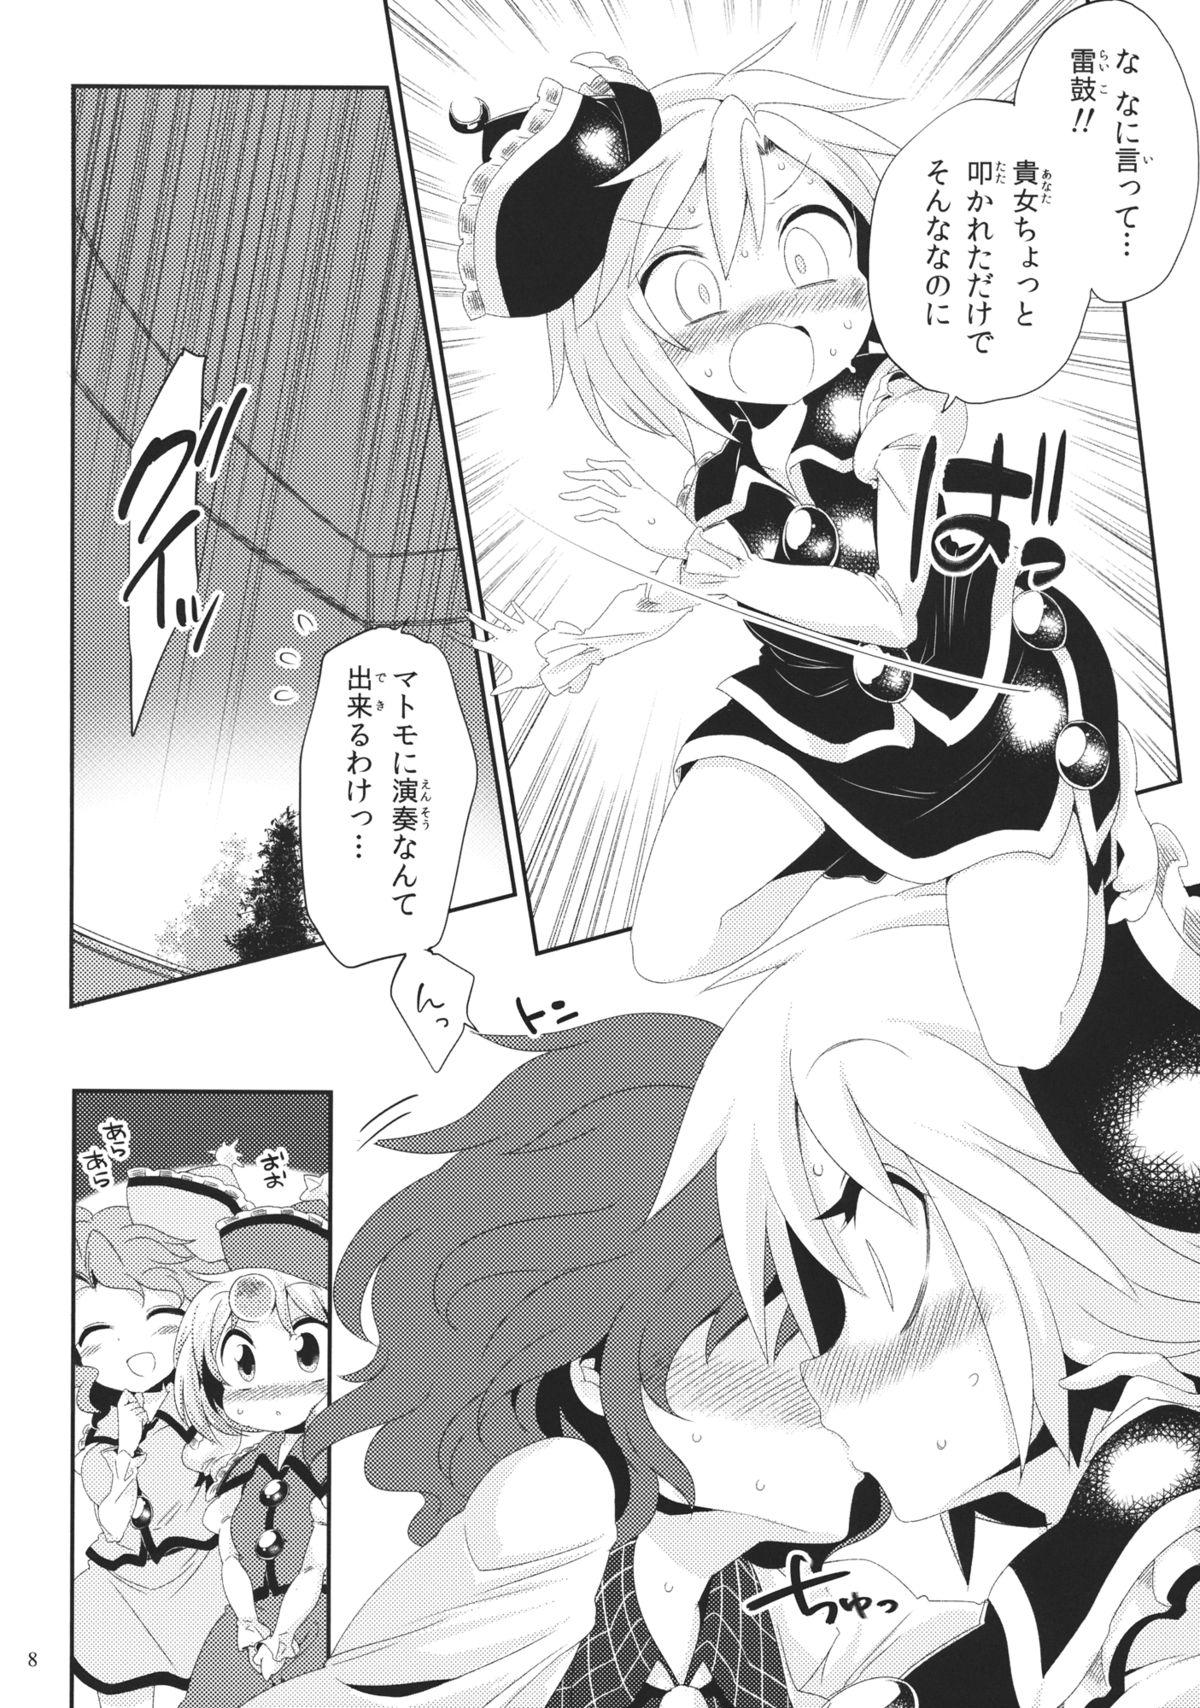 Sesso Alternate Modulation - Touhou project Polla - Page 7